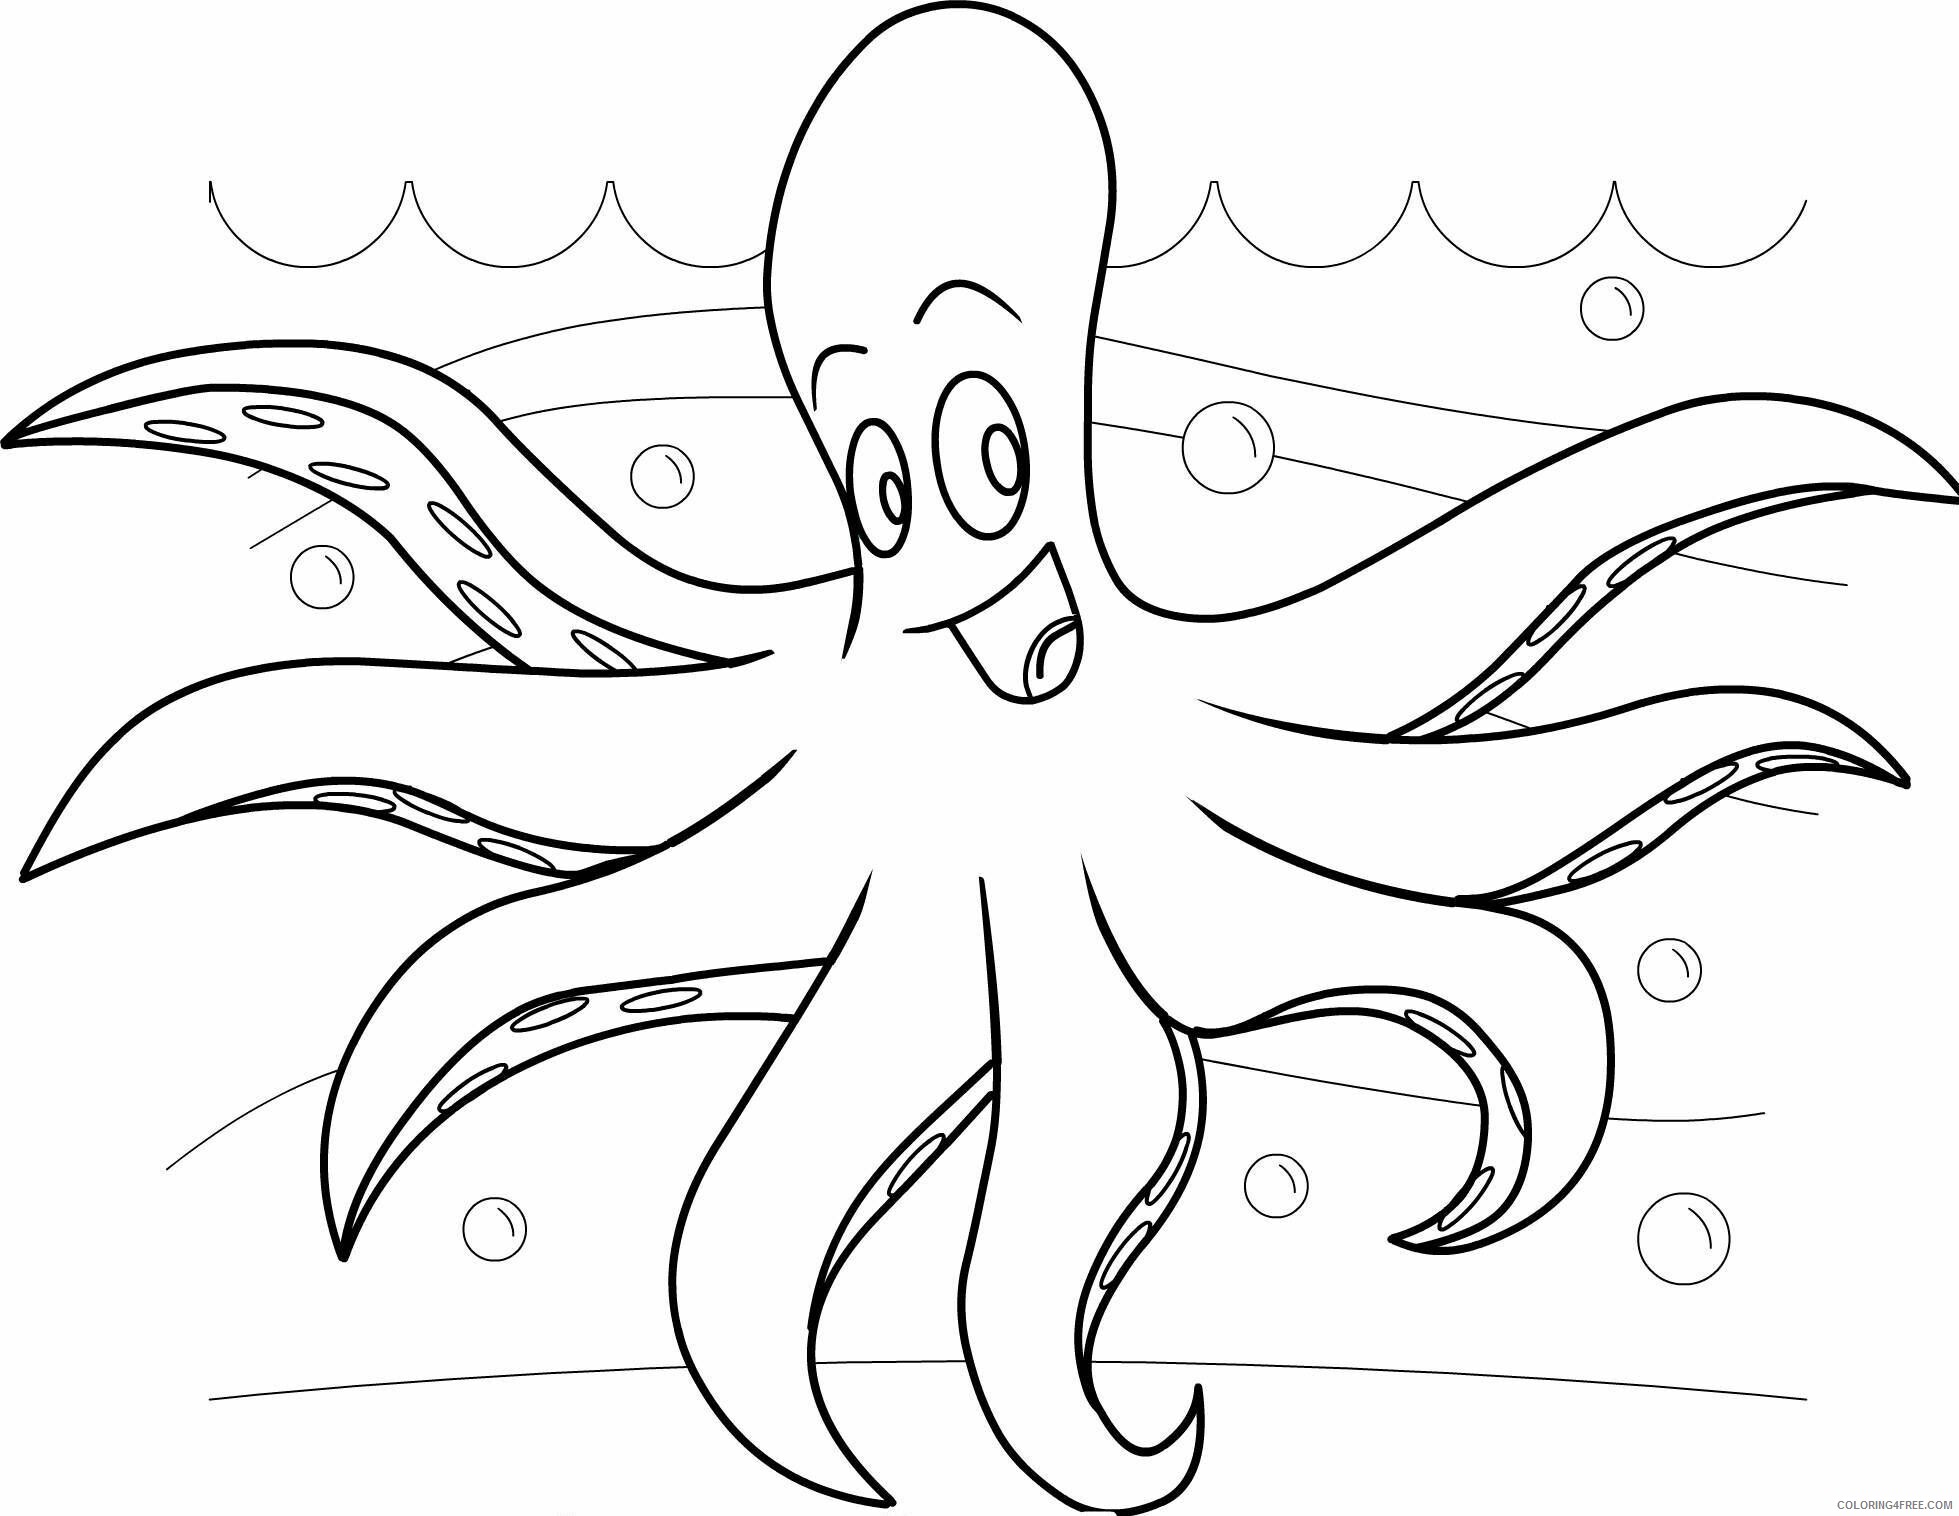 Octopus Coloring Sheets Animal Coloring Pages Printable 2021 2949 Coloring4free